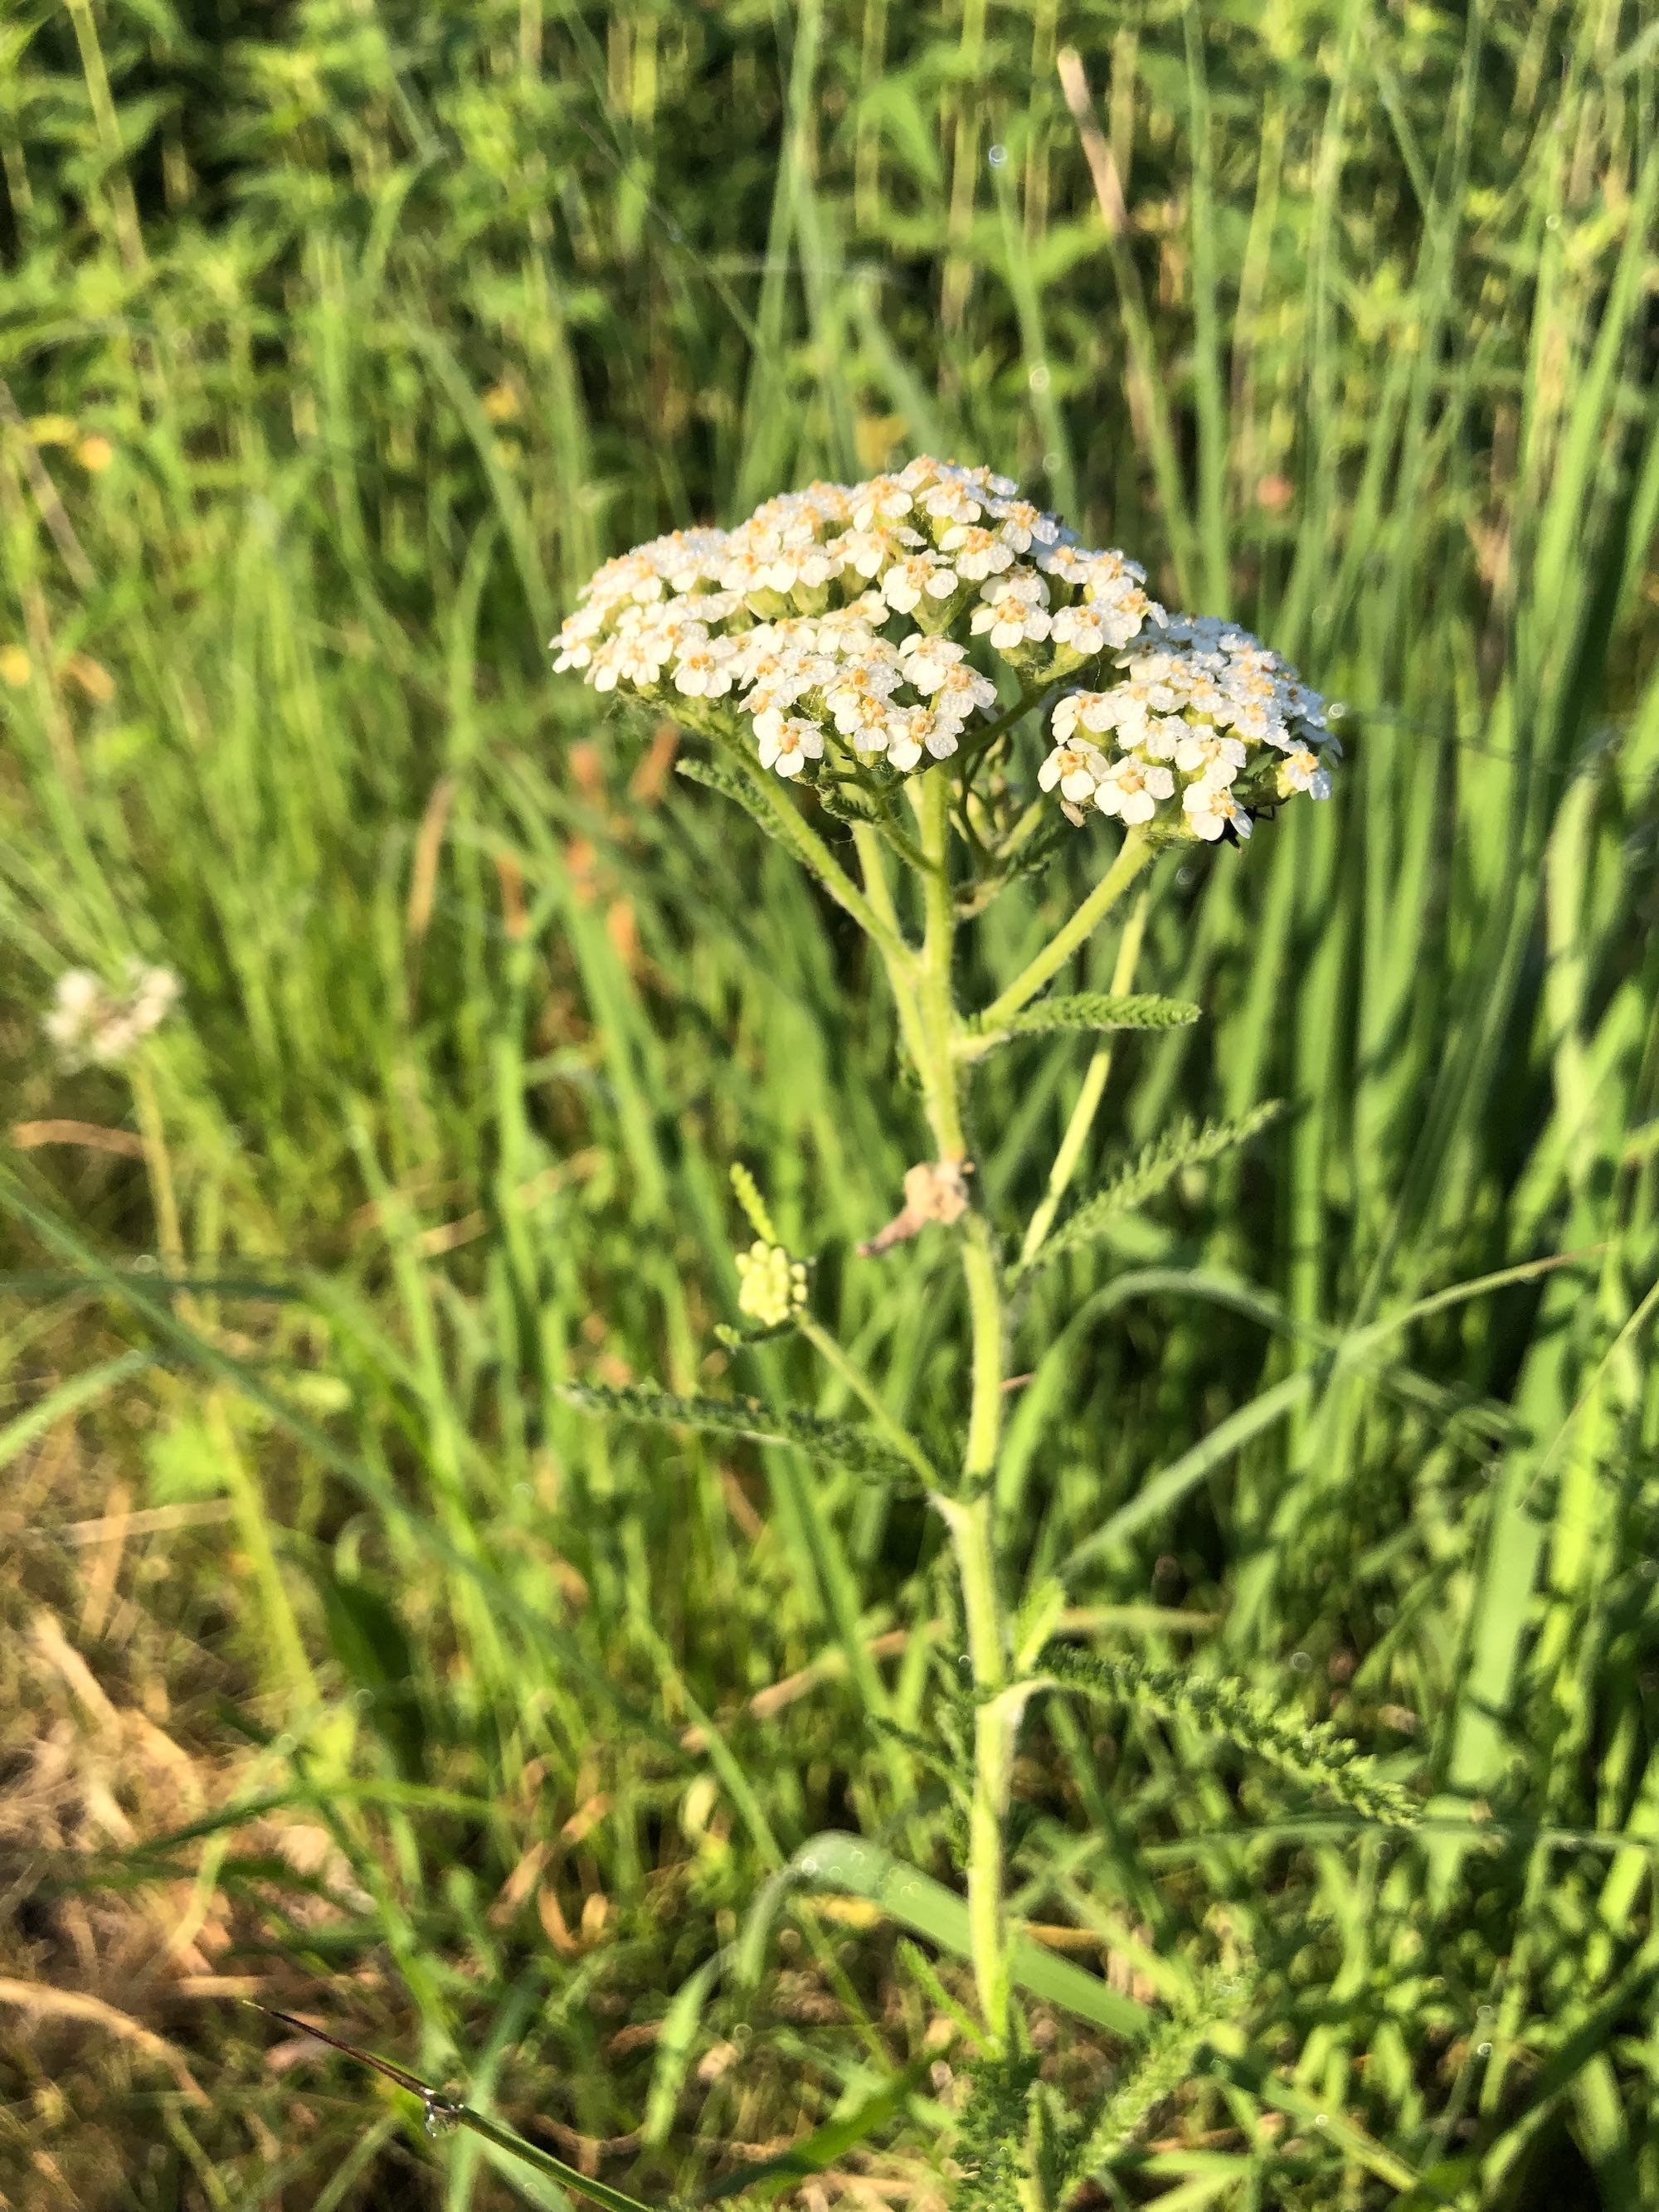 Common Yarrow on shore of Marion Dunn Pond on June 12, 2021.